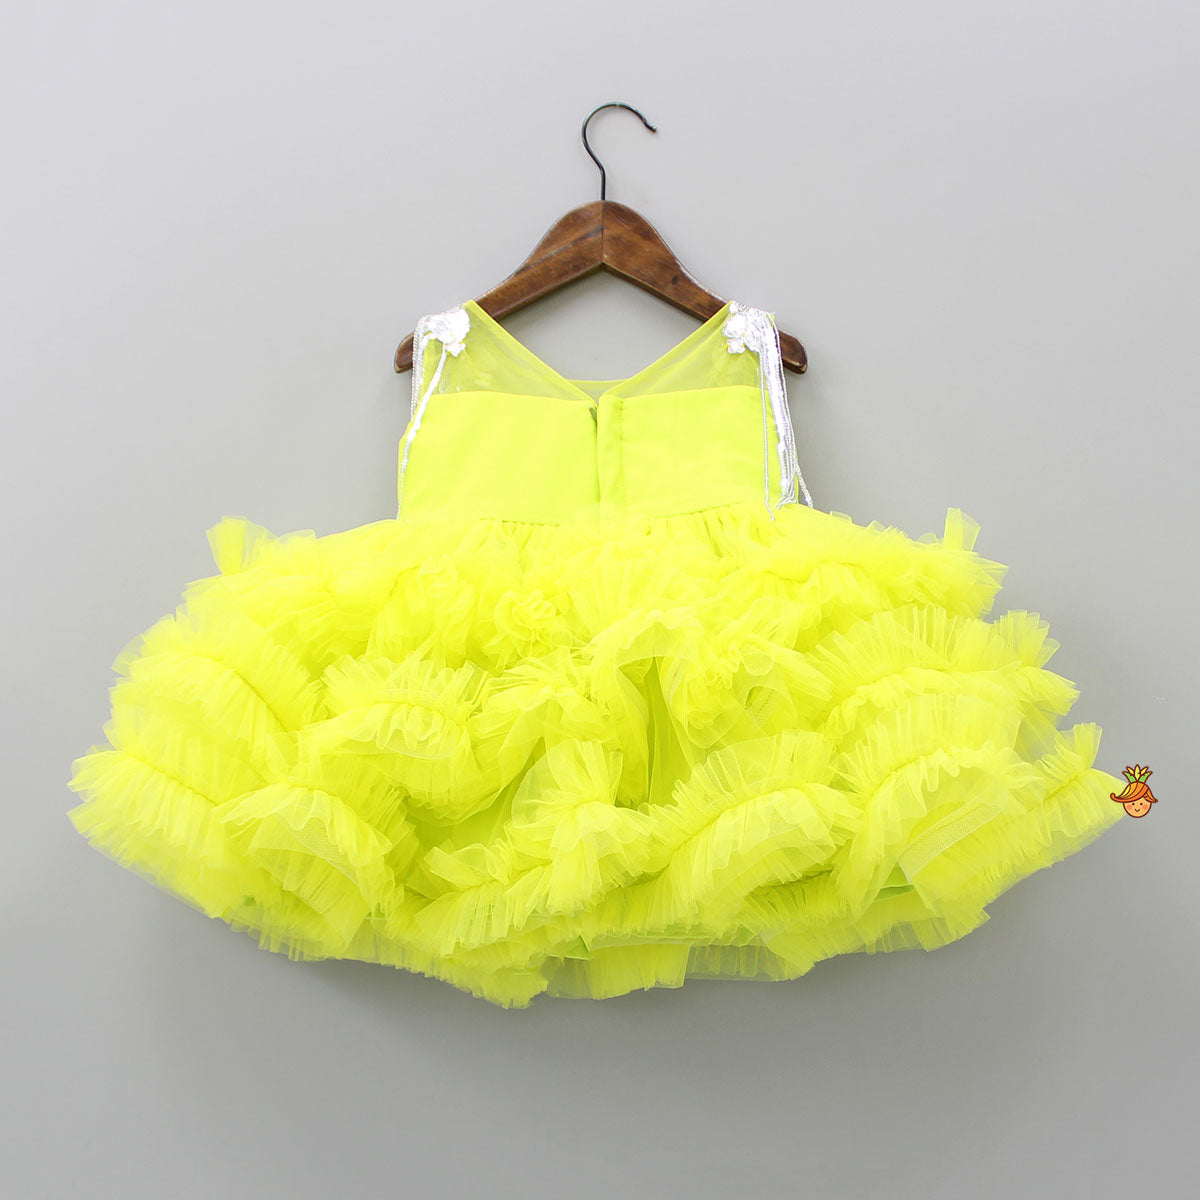 Glamorous Green Layered Frilled Dress With Hair Clip